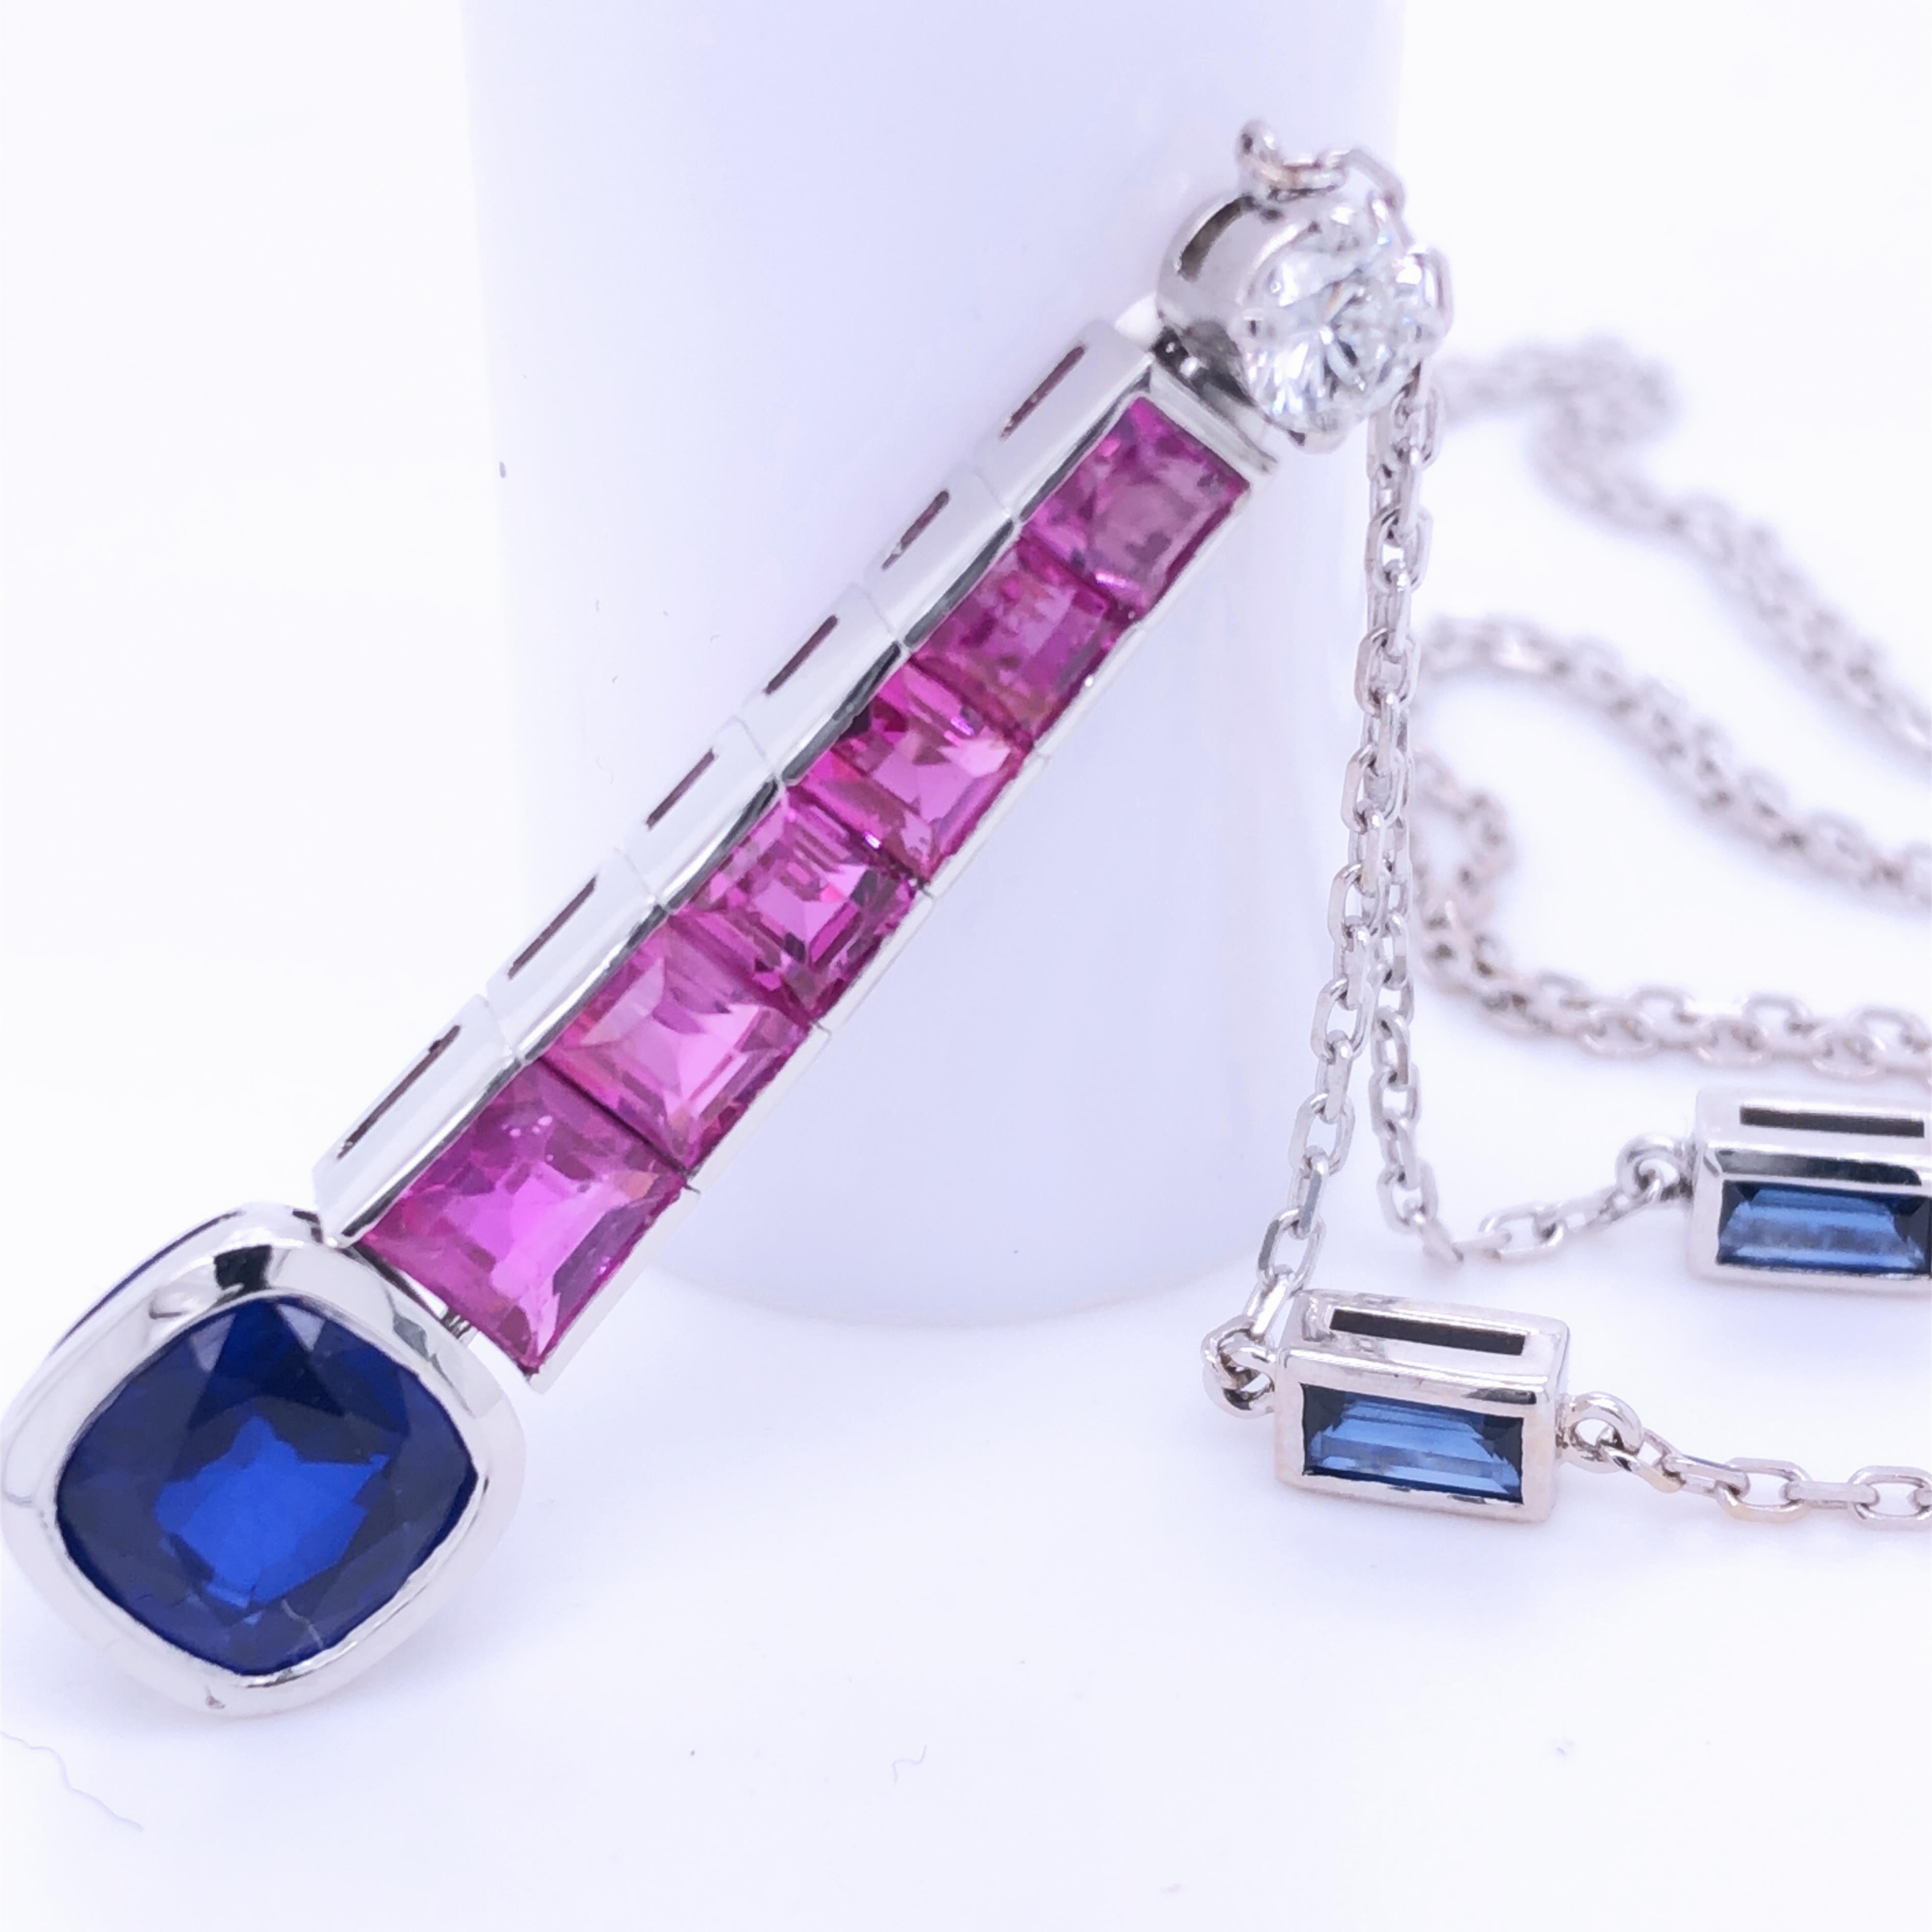 Awesome 1970 Platinum Necklace feturing a 2.51Kt Cushion Cut Royal Blue Sapphire, six 1.64Kt Princess Cut Burma Ruby, one 0.18Kt White Diamond Brilliant Cut and two, 0.49Kt Blue Sapphire Baguette Cut. A made in Italy timeless, geometric chain